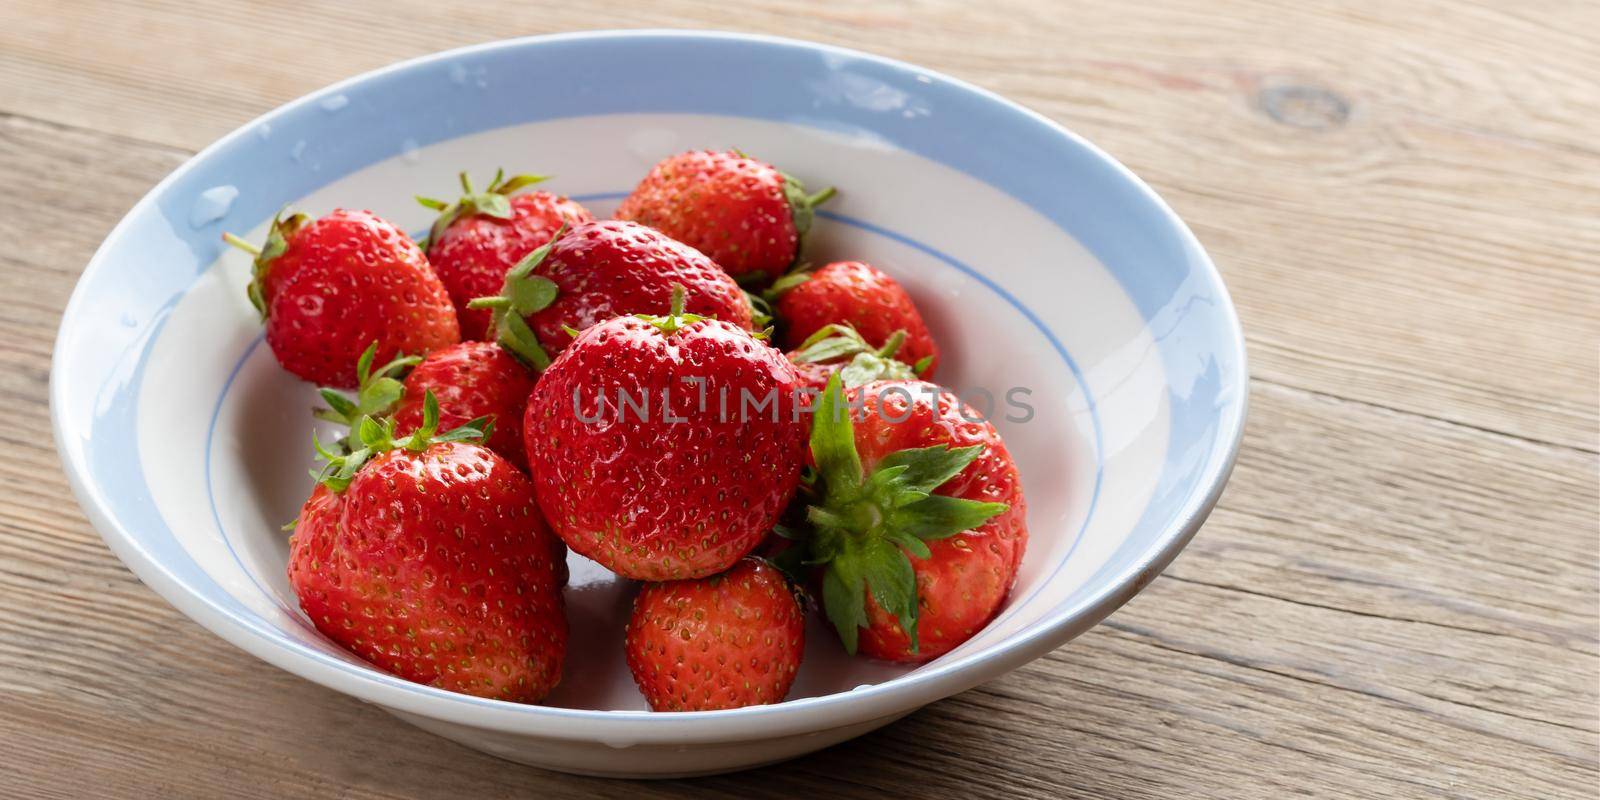 Natural ripe strawberries in a plain white bowl on a wooden table by galsand